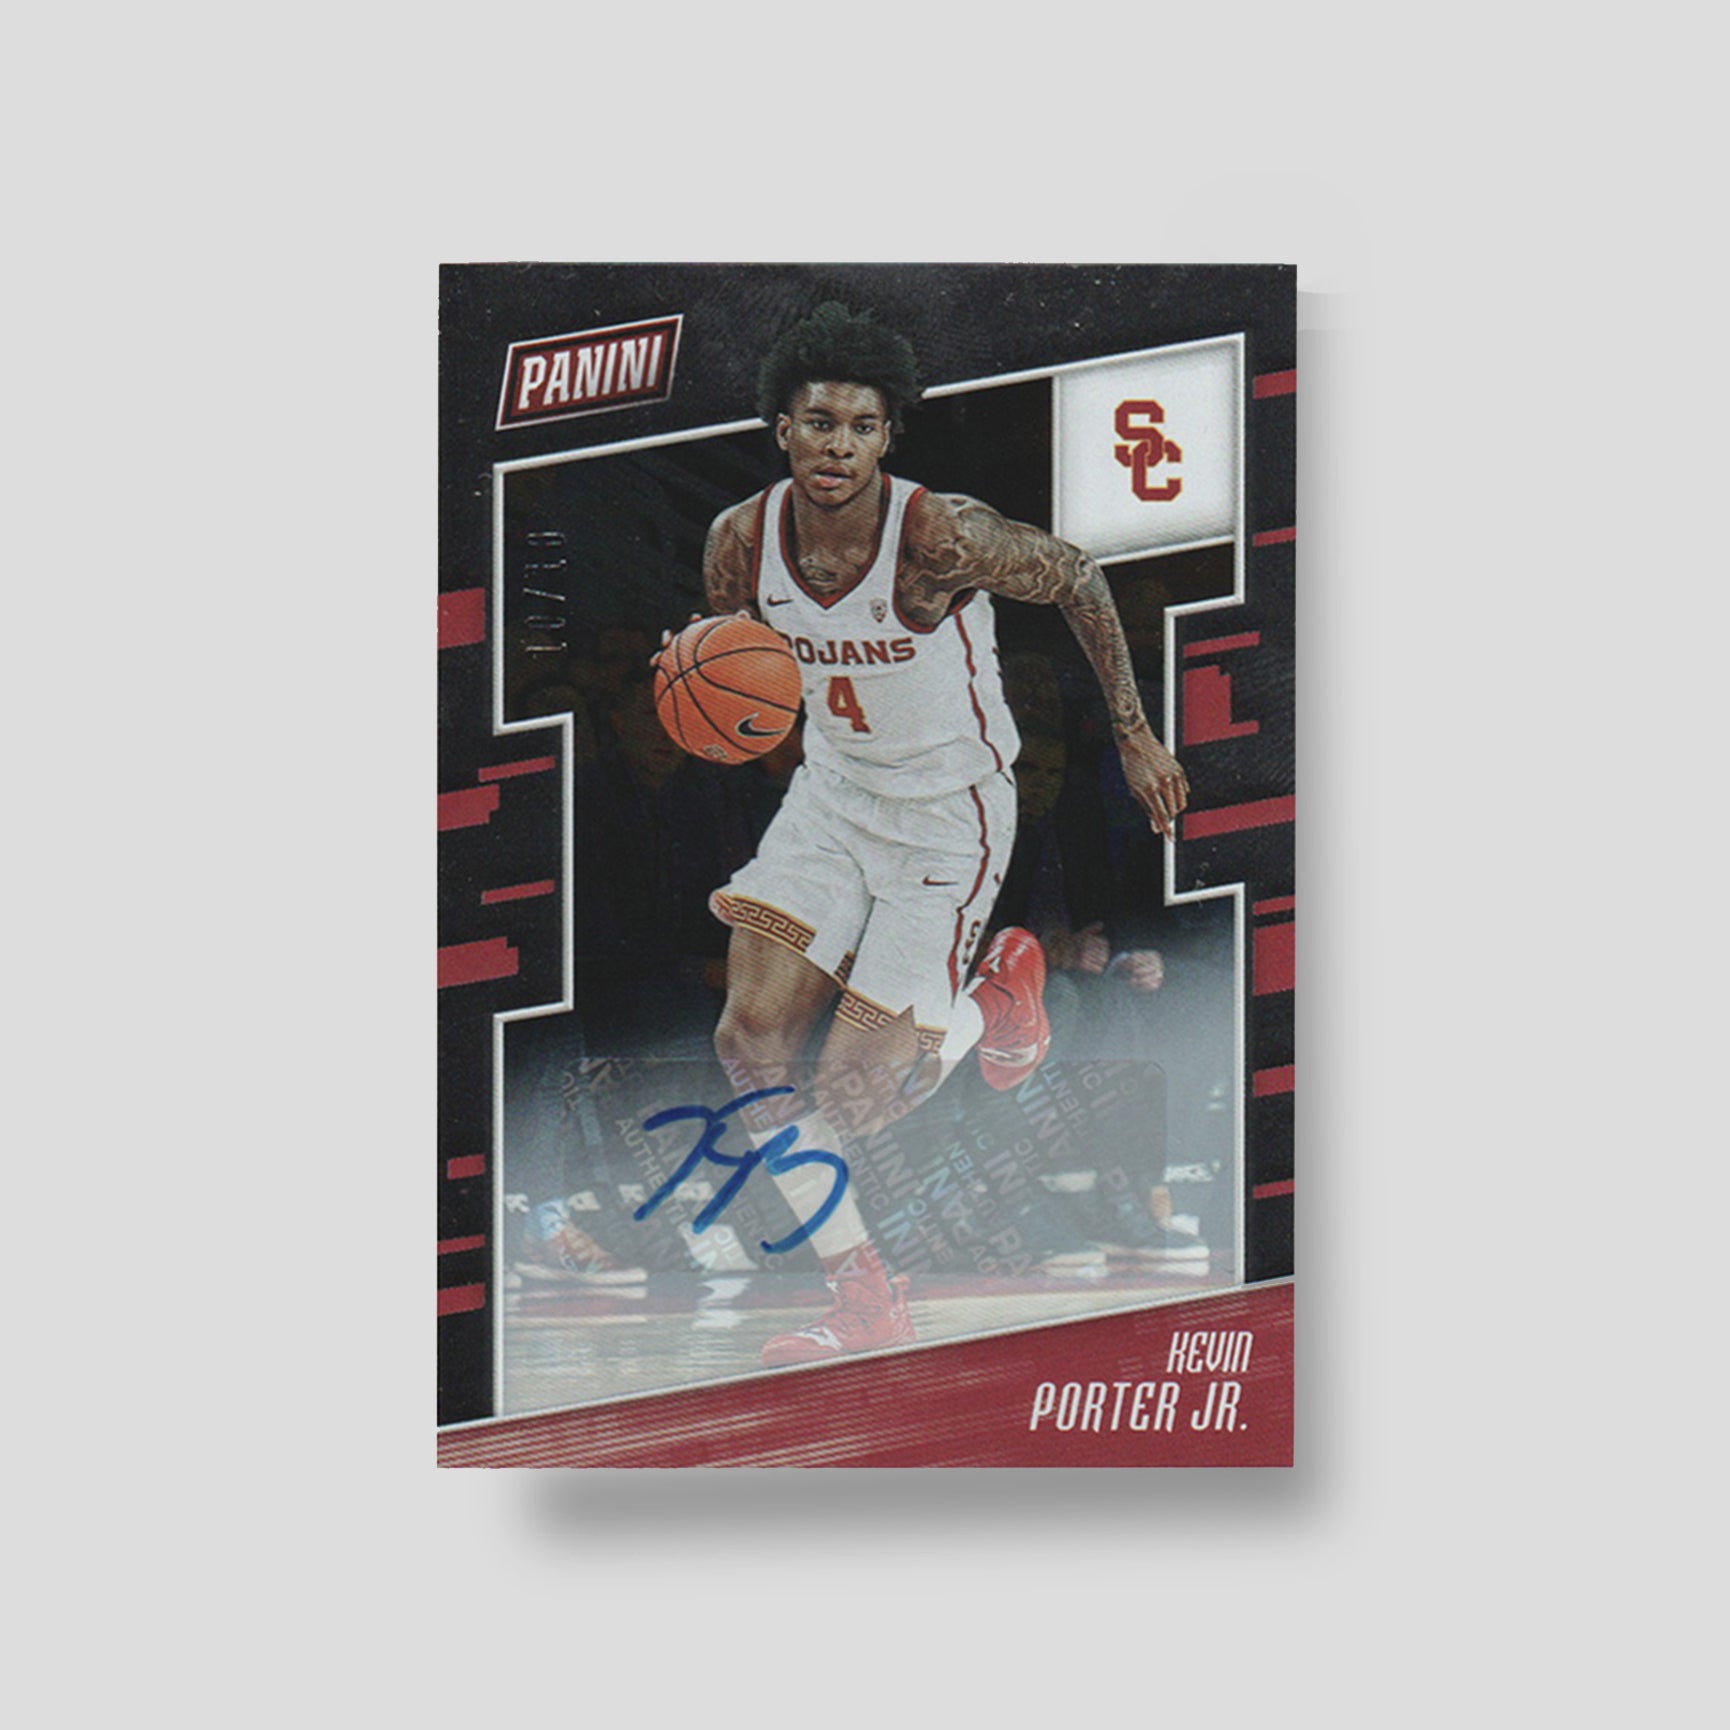 2019 Panini The National /10 Kevin Porter Jr. - Q's Cards